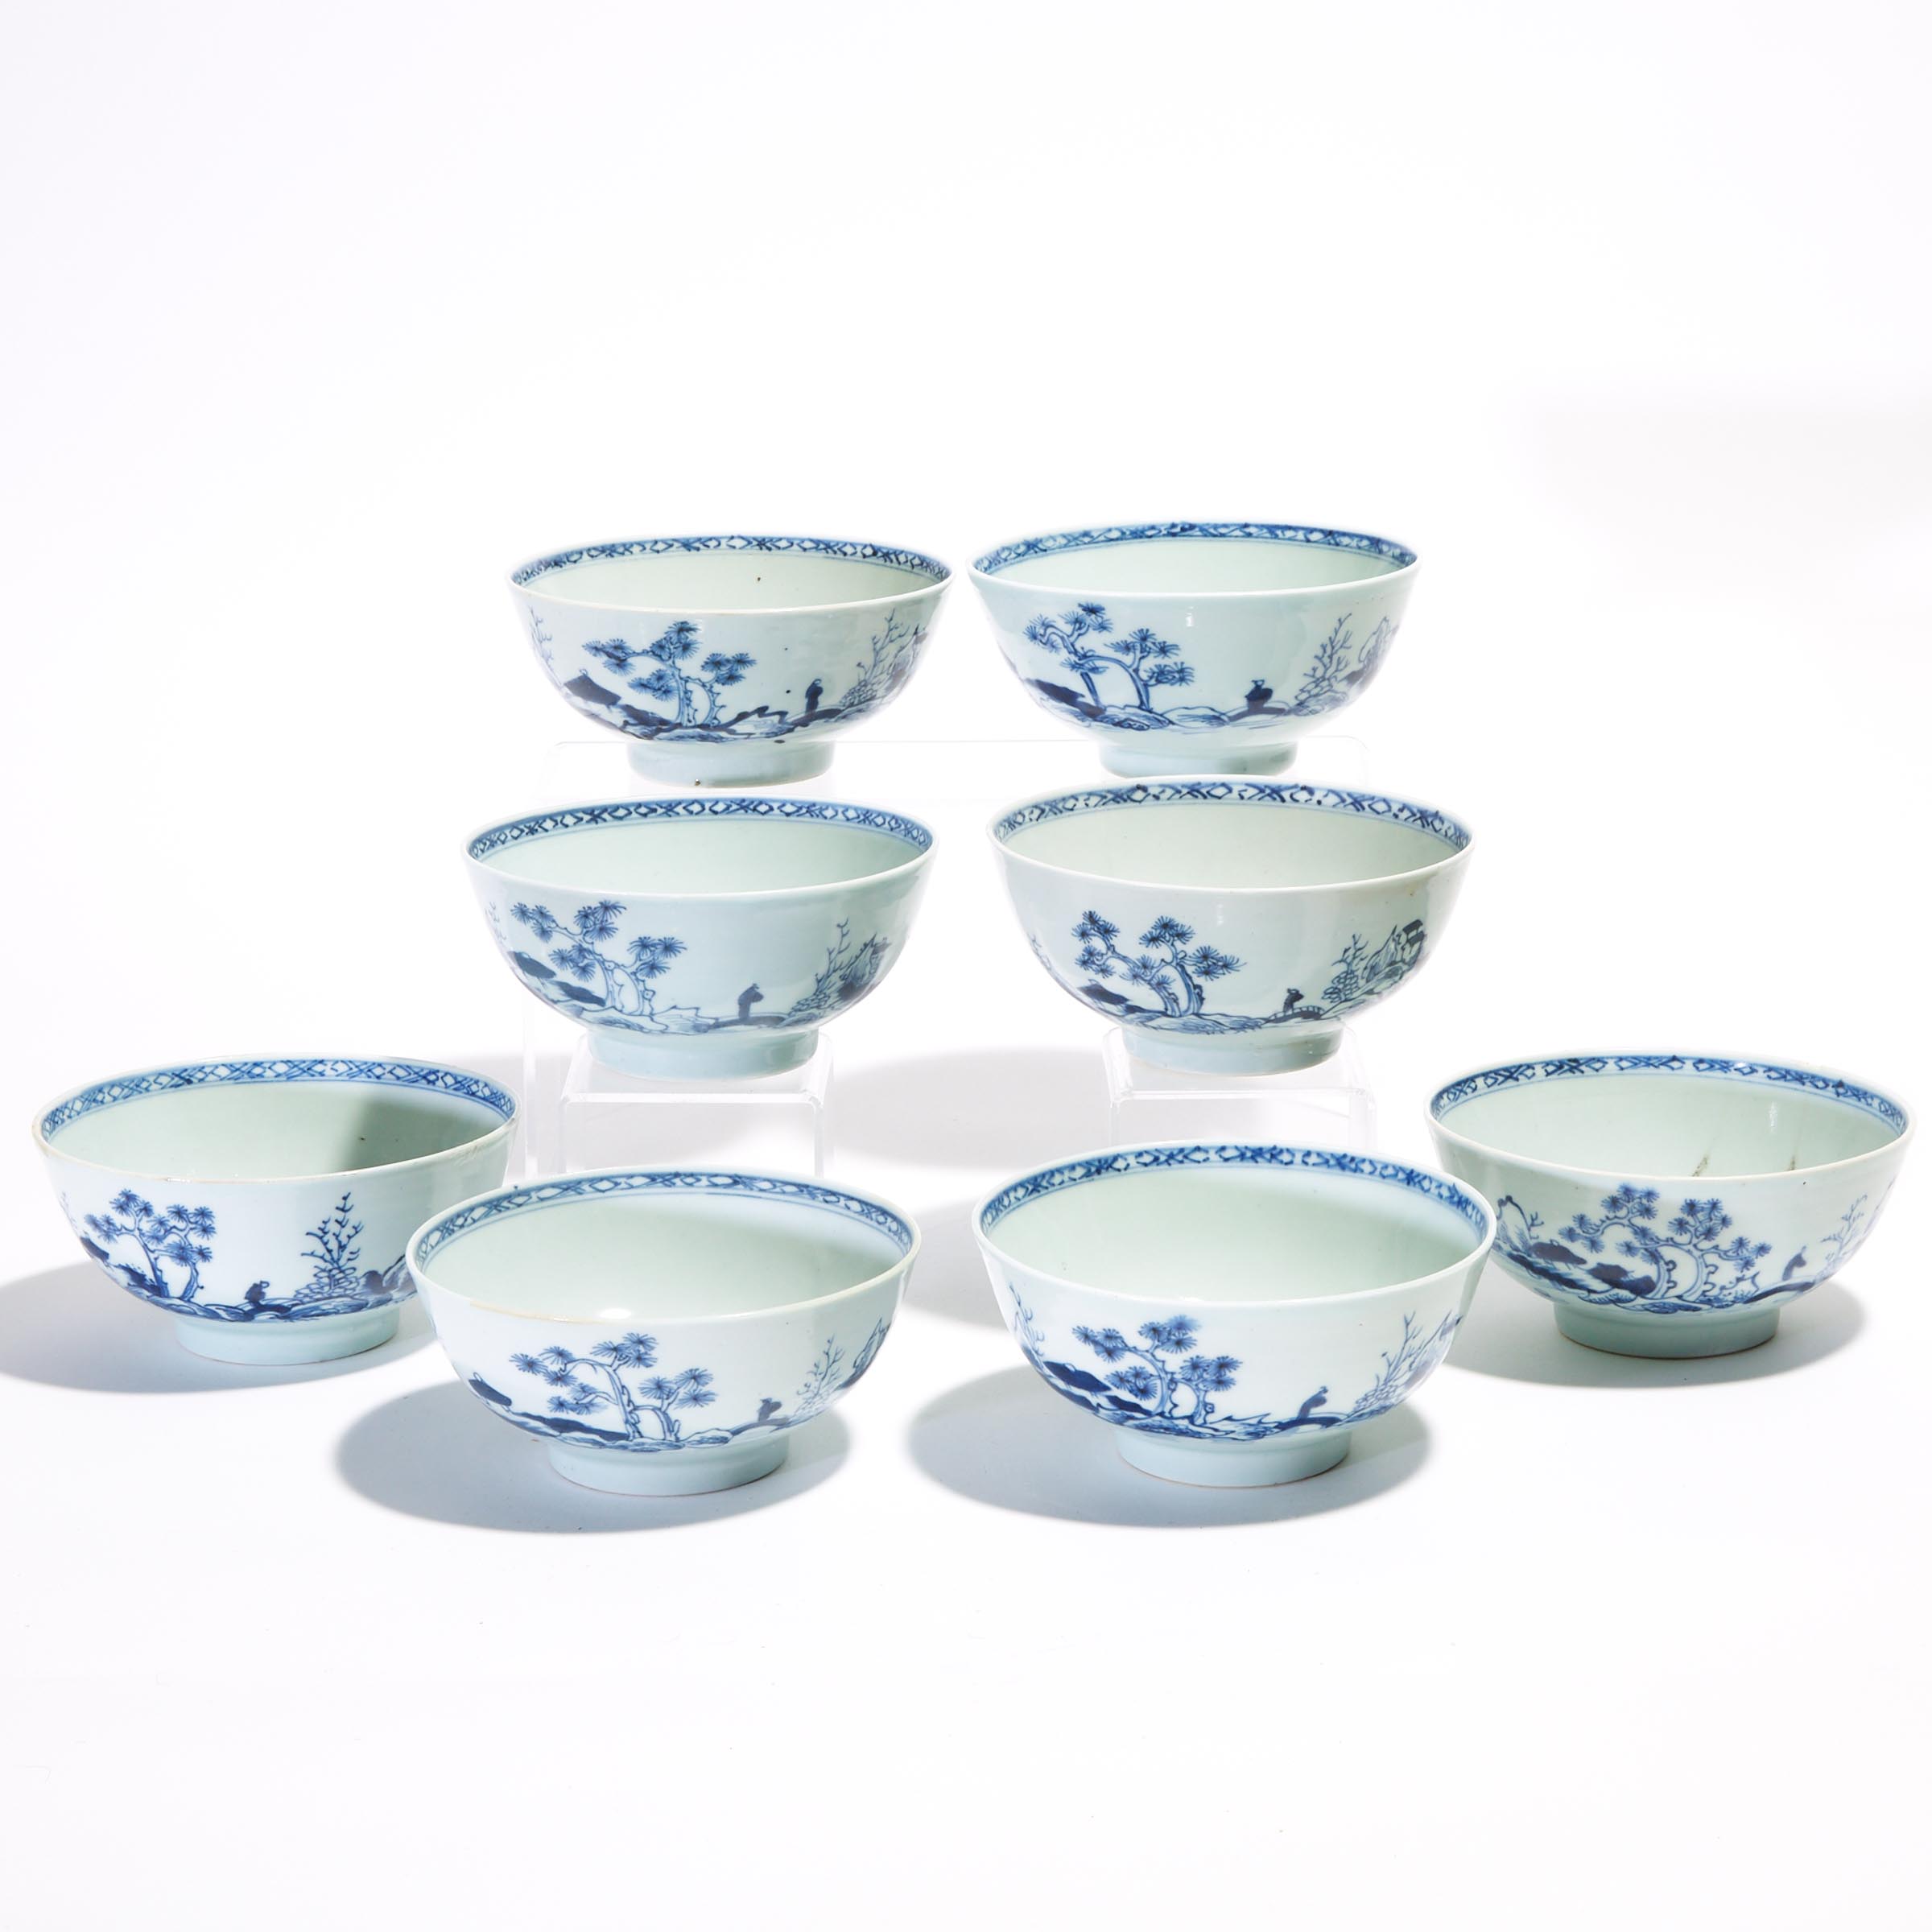 A Set of Eight 'Scholar on Bridge' Pattern Small Bowls from the Nanking Cargo, Qianlong Period, Circa 1750